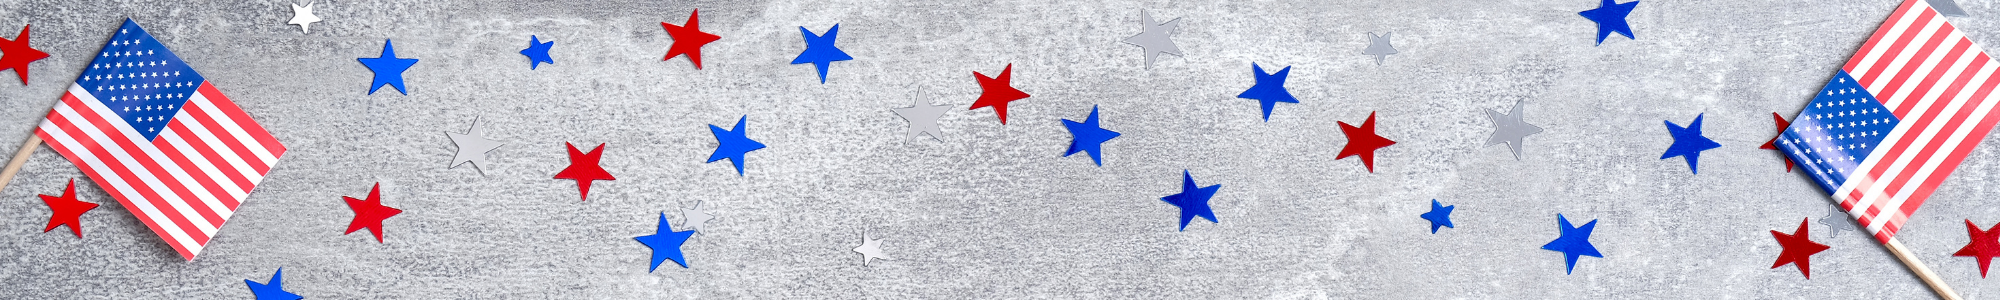 patriotic image with stars and flags